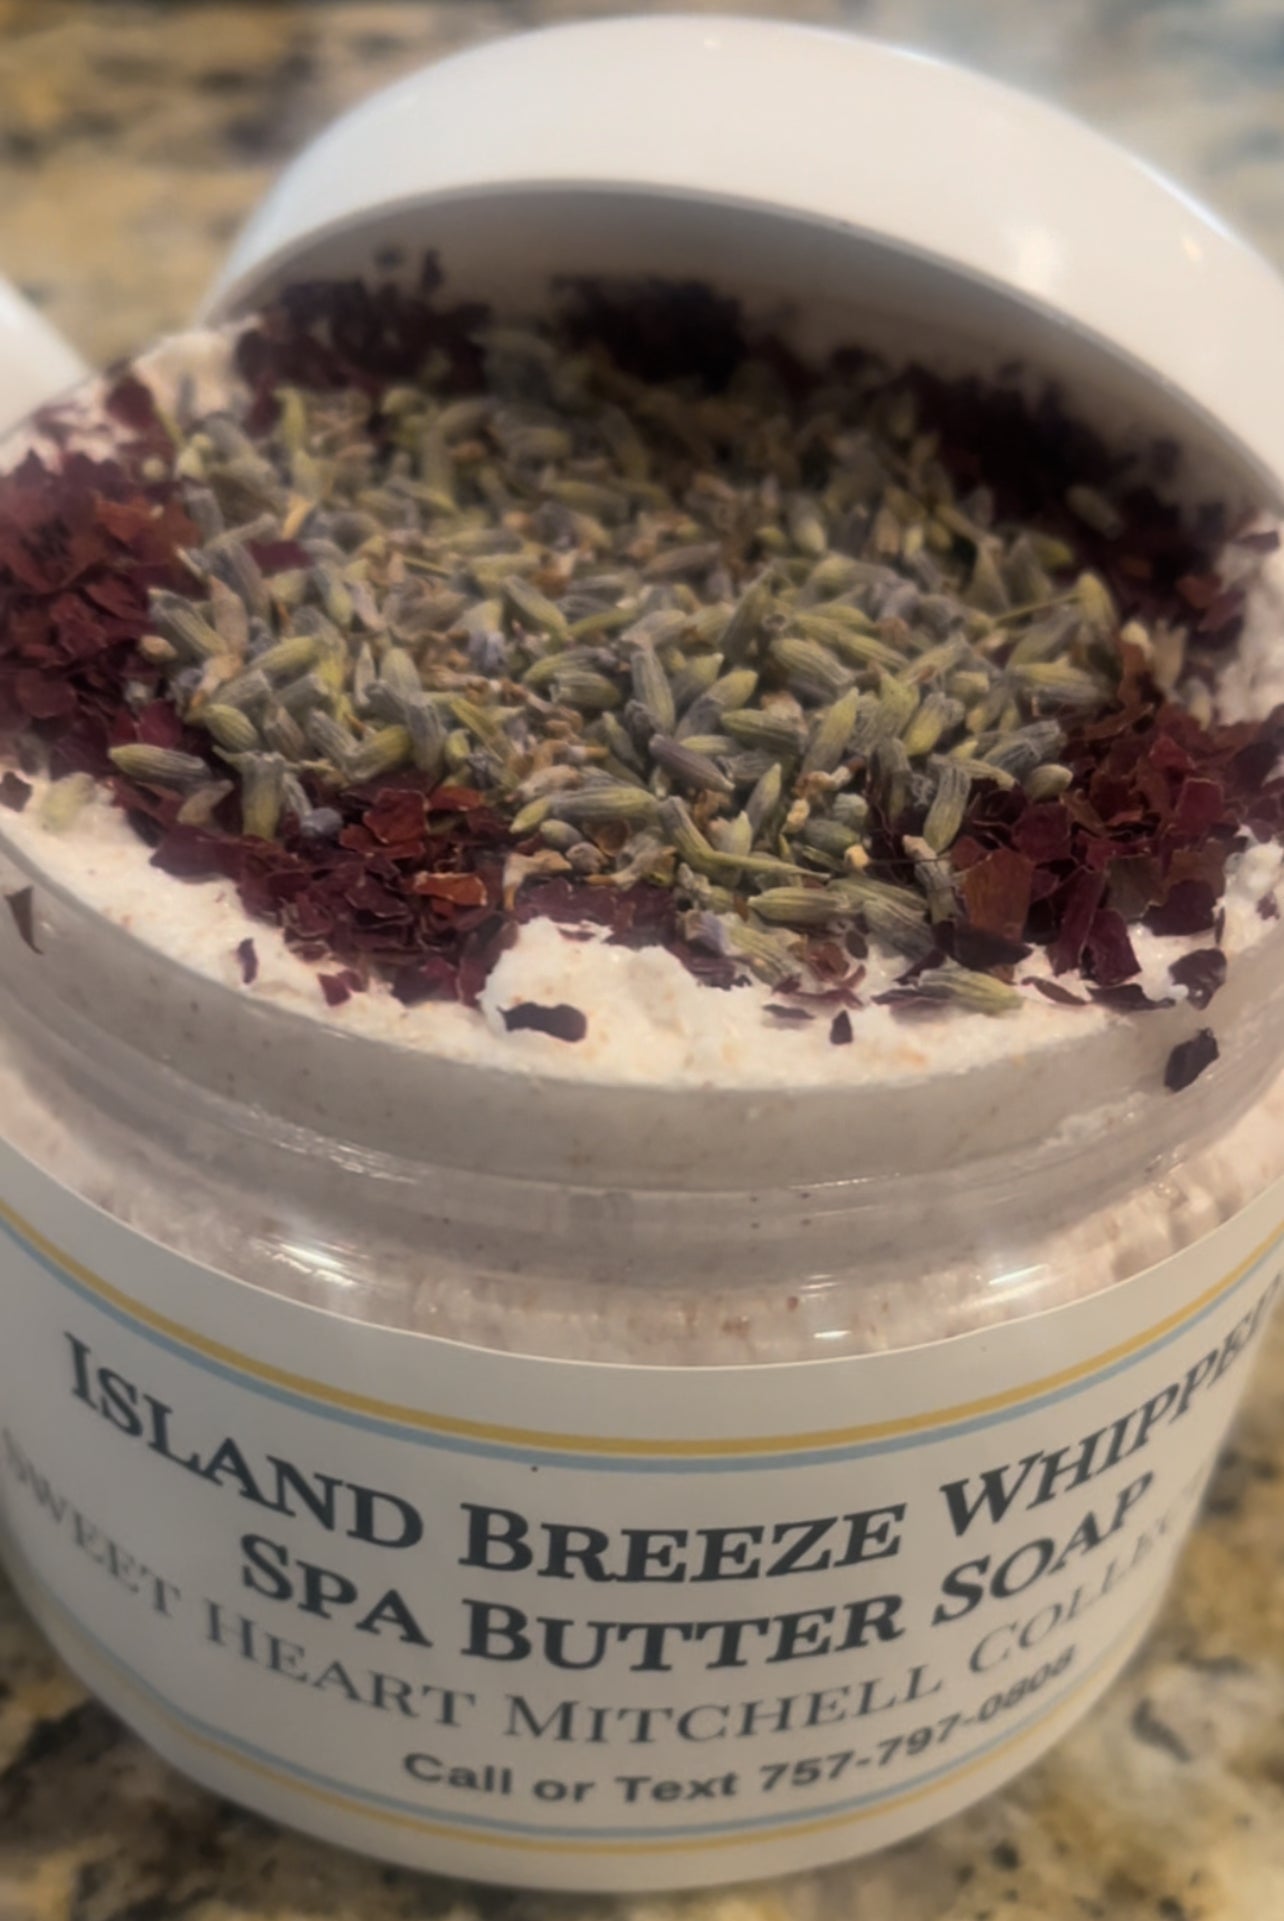 12 oz Island Breeze Whipped Spa Butter